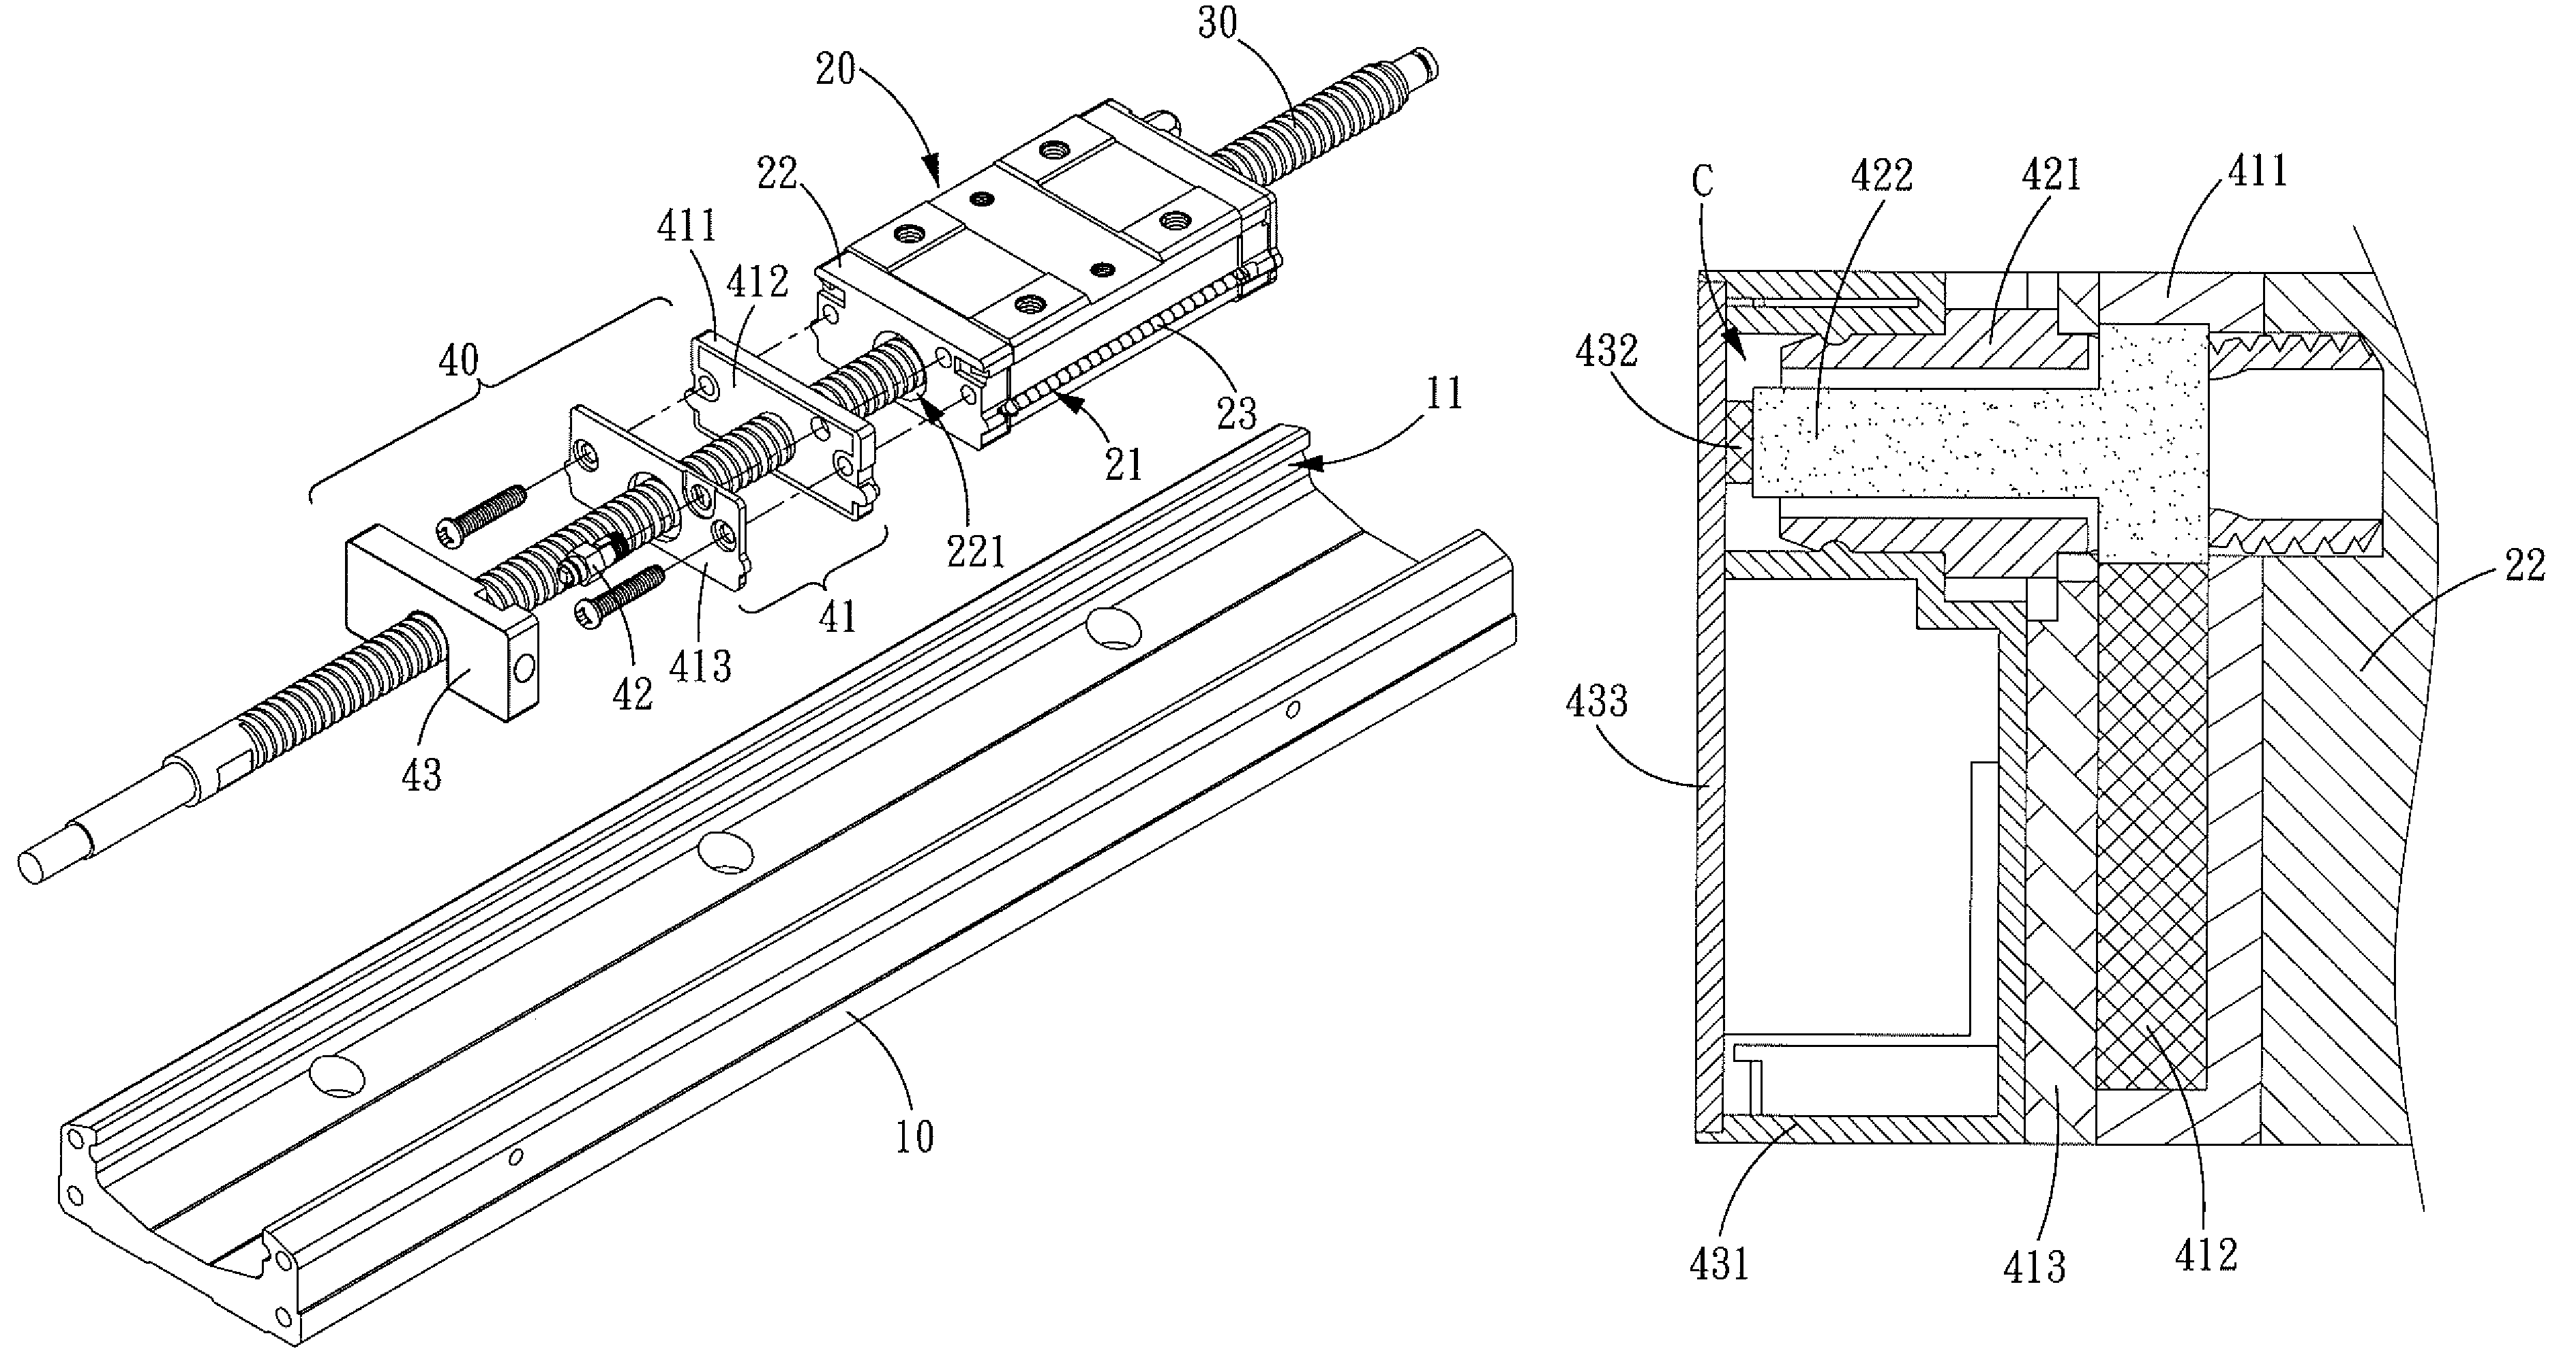 Linear driving device with a self-lubricating assembly